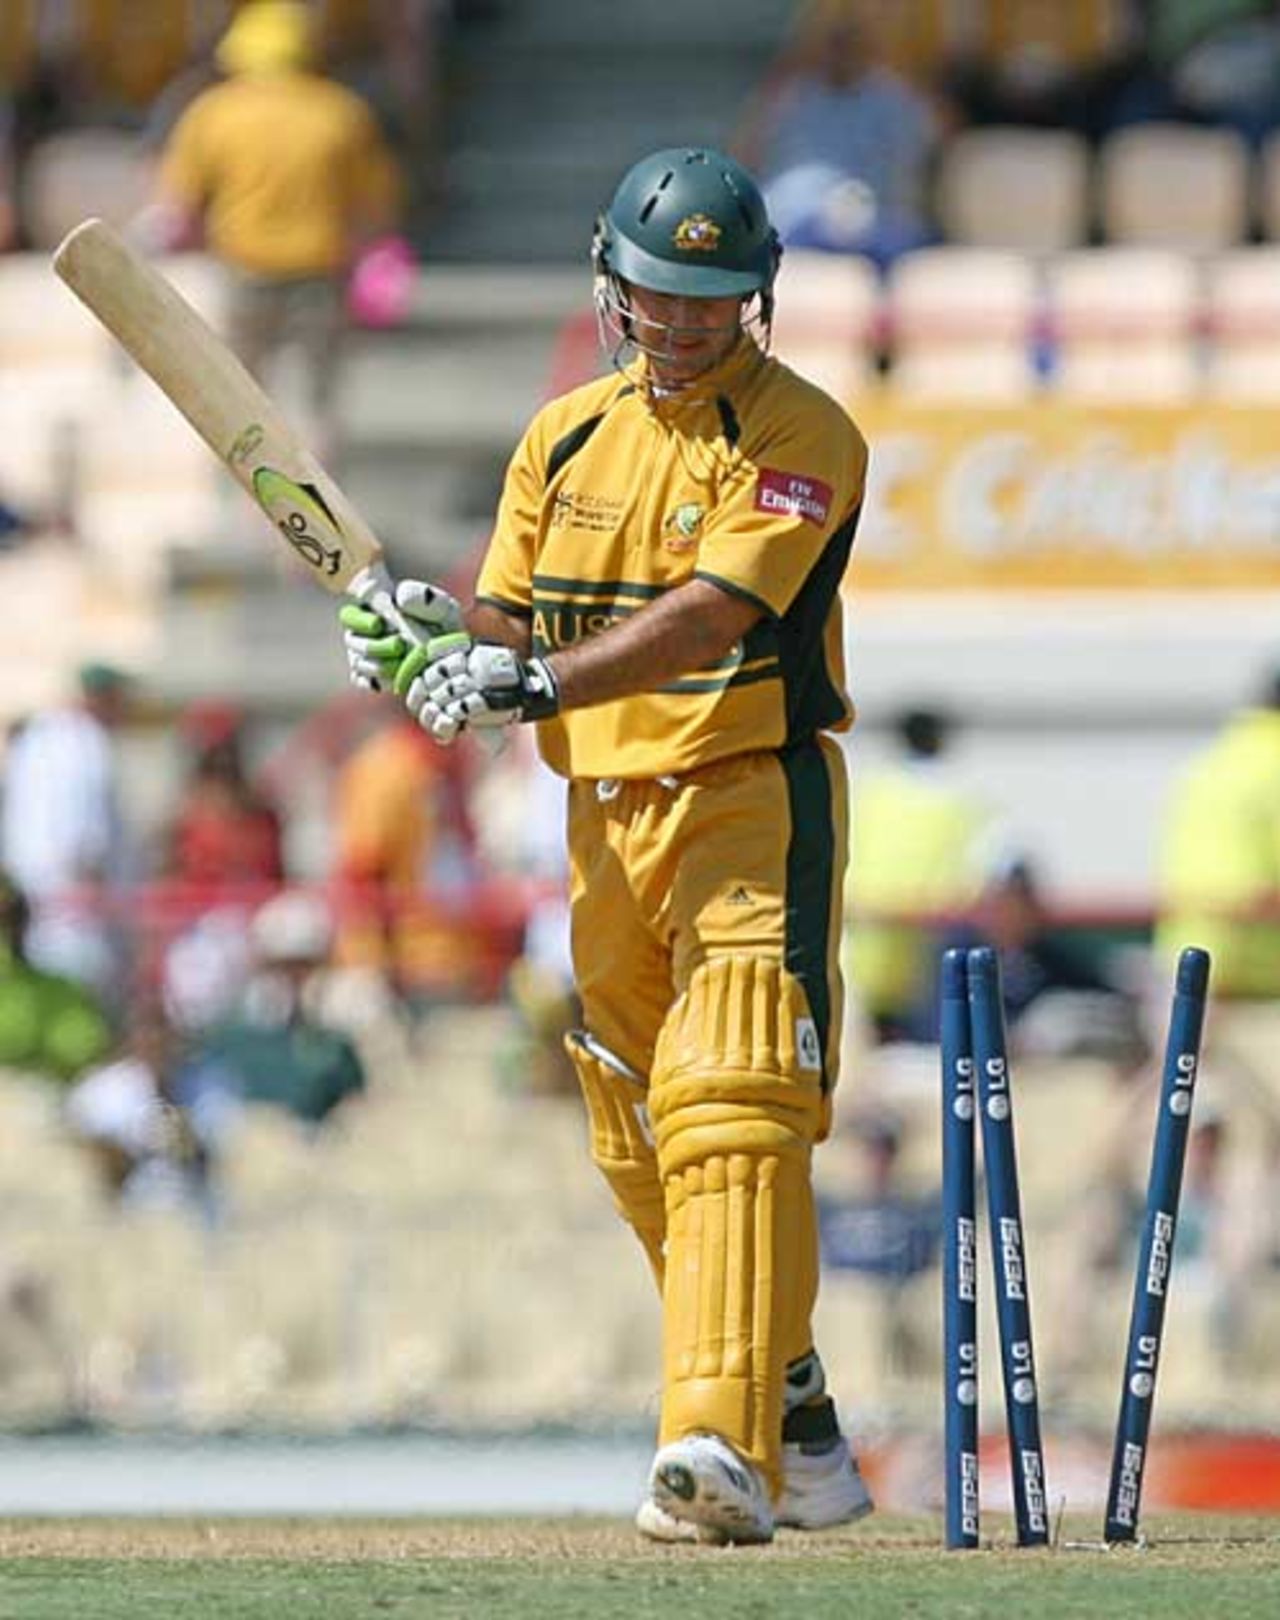 Ricky Ponting leaves after being bowled by Andre Nel, Australia v South Africa, 2nd semi-final, St Lucia, April 25, 2007